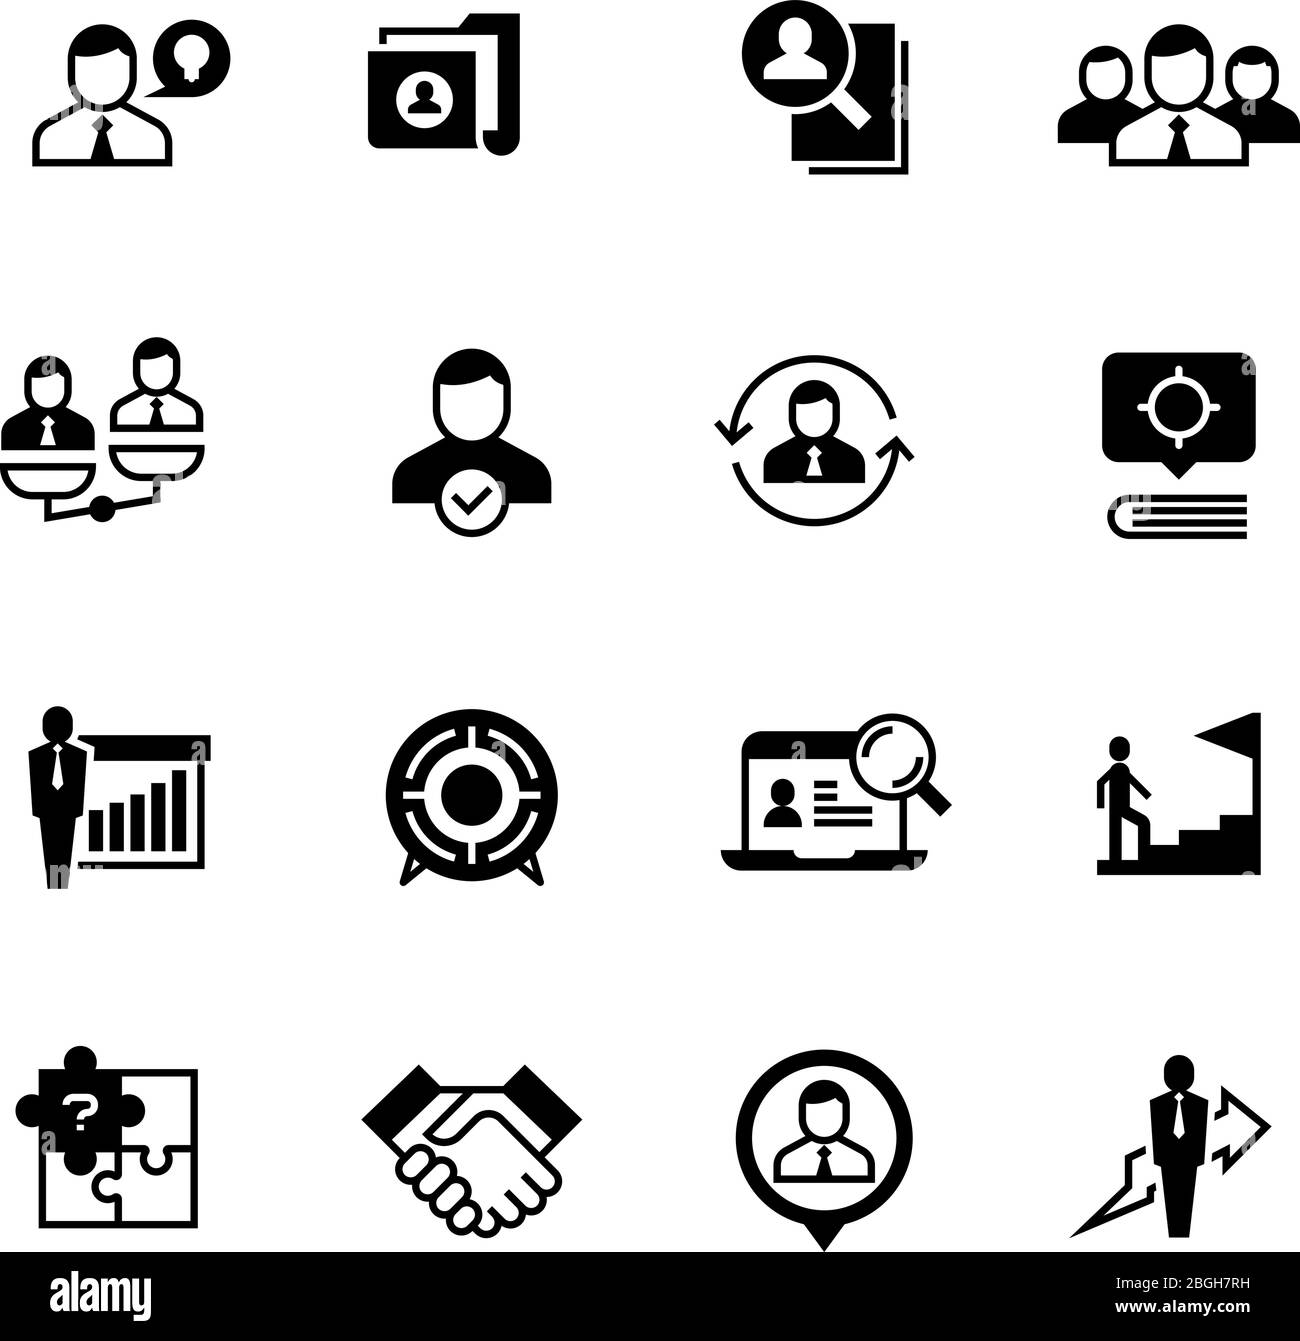 Human resources and person management icons. Job interview, employee choice and recruitment vector symbols isolated. Illustration of job and employee, recruitment in business Stock Vector